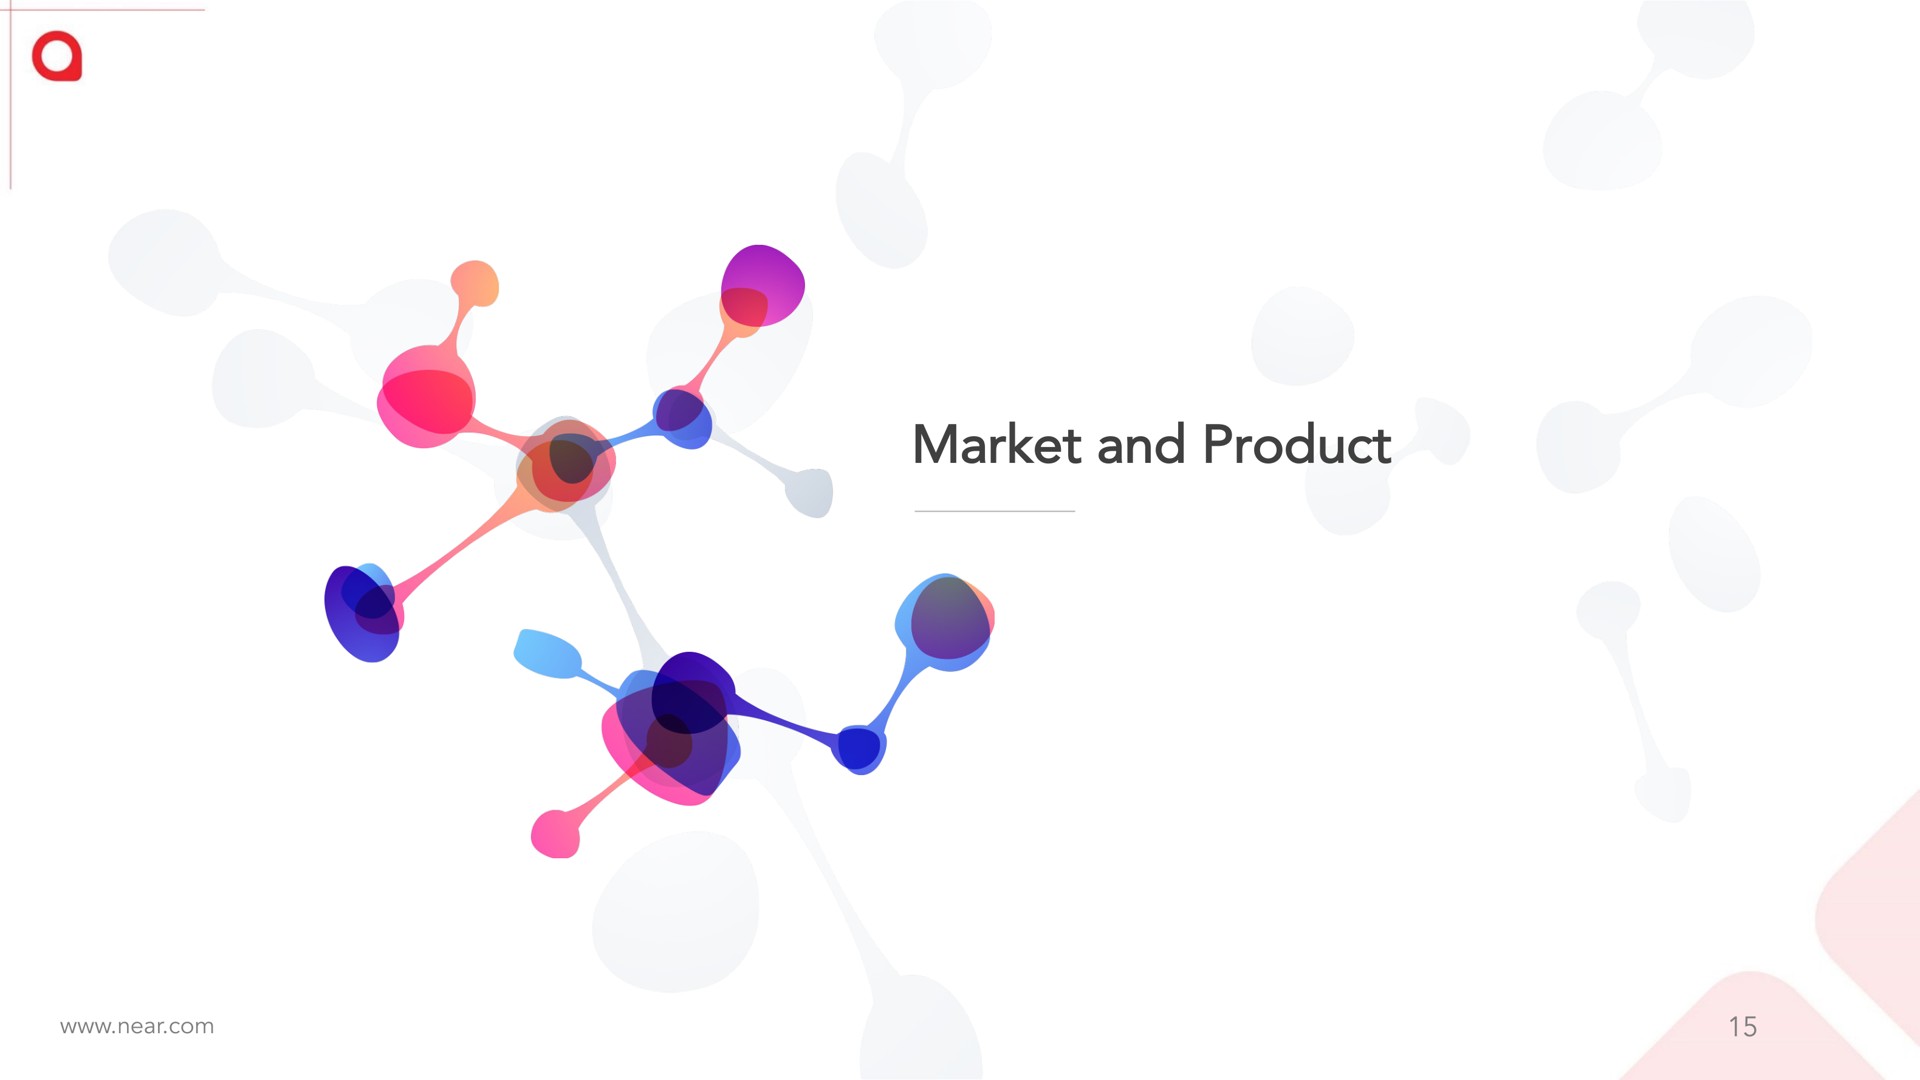 market and product | Near